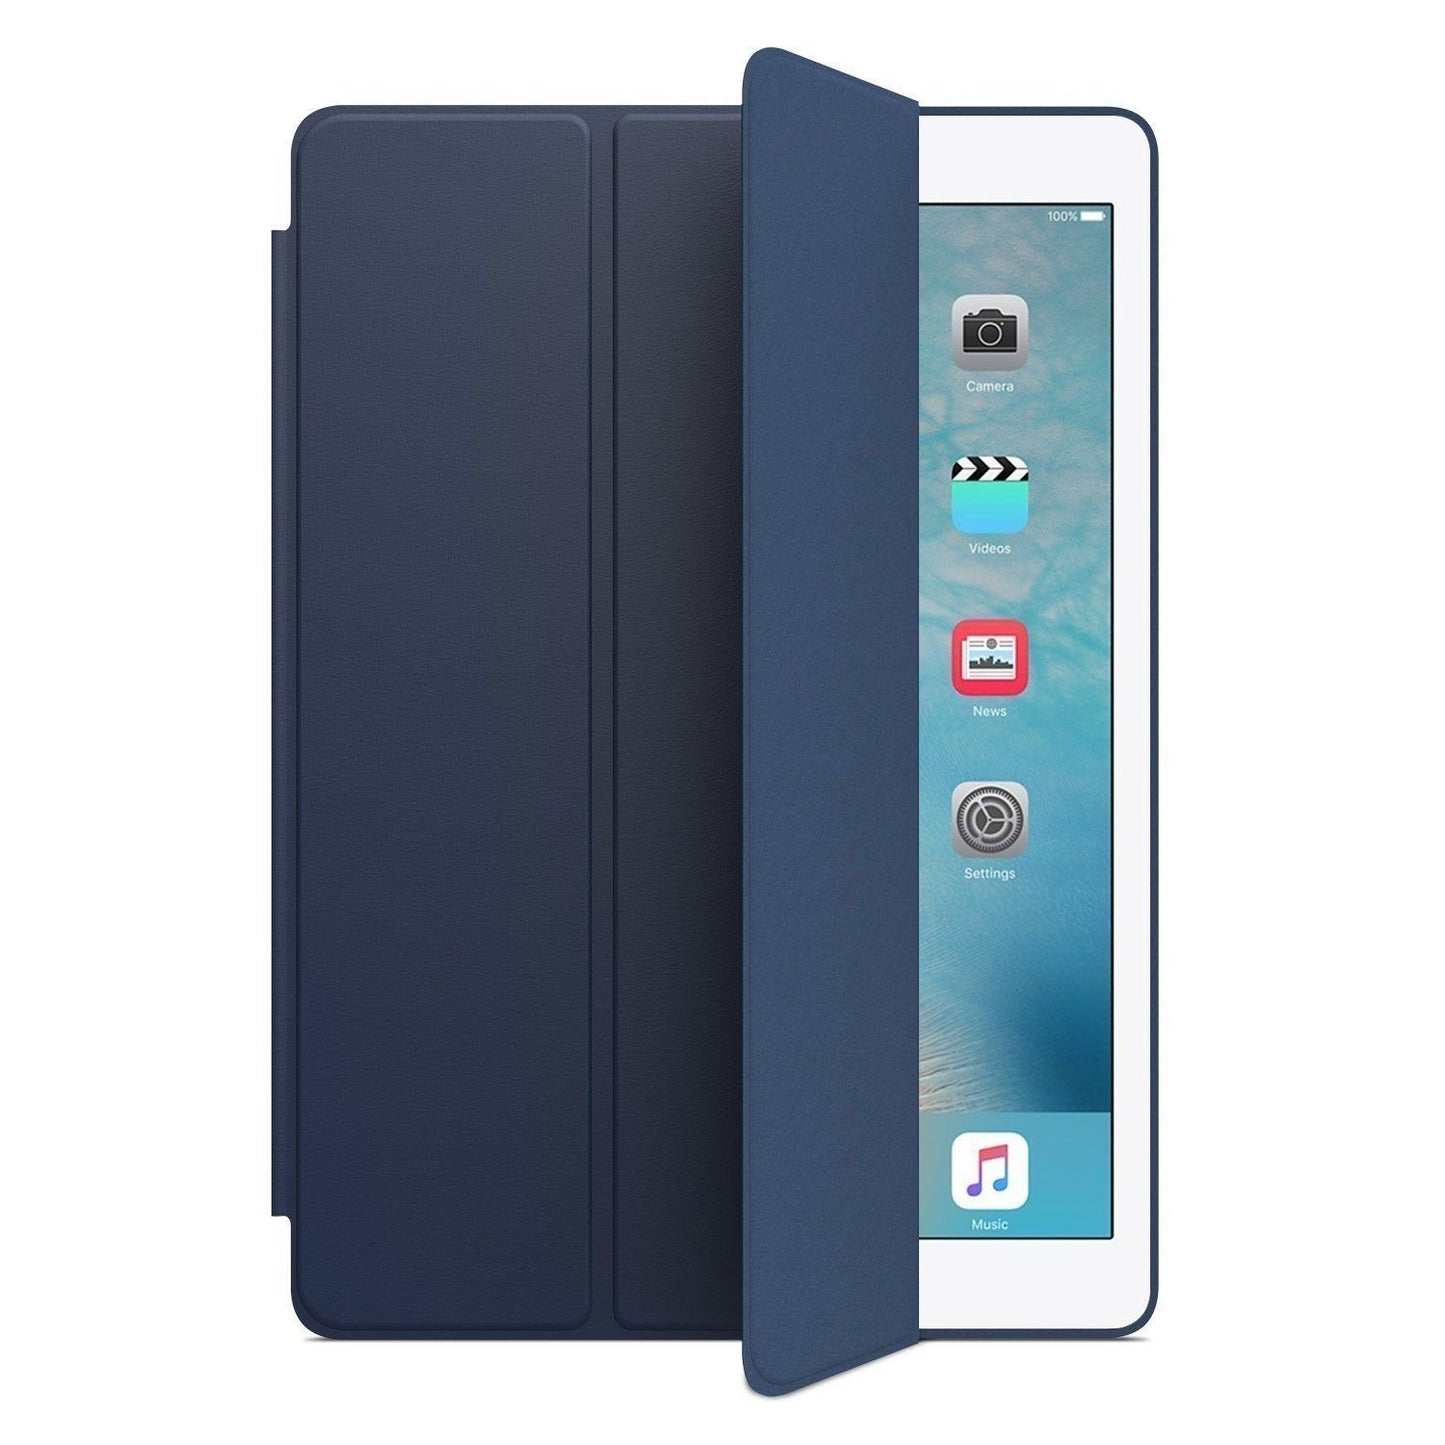 Trifold Smart Cover with Flip Stand for iPad Pro 9.7-inch (2016)